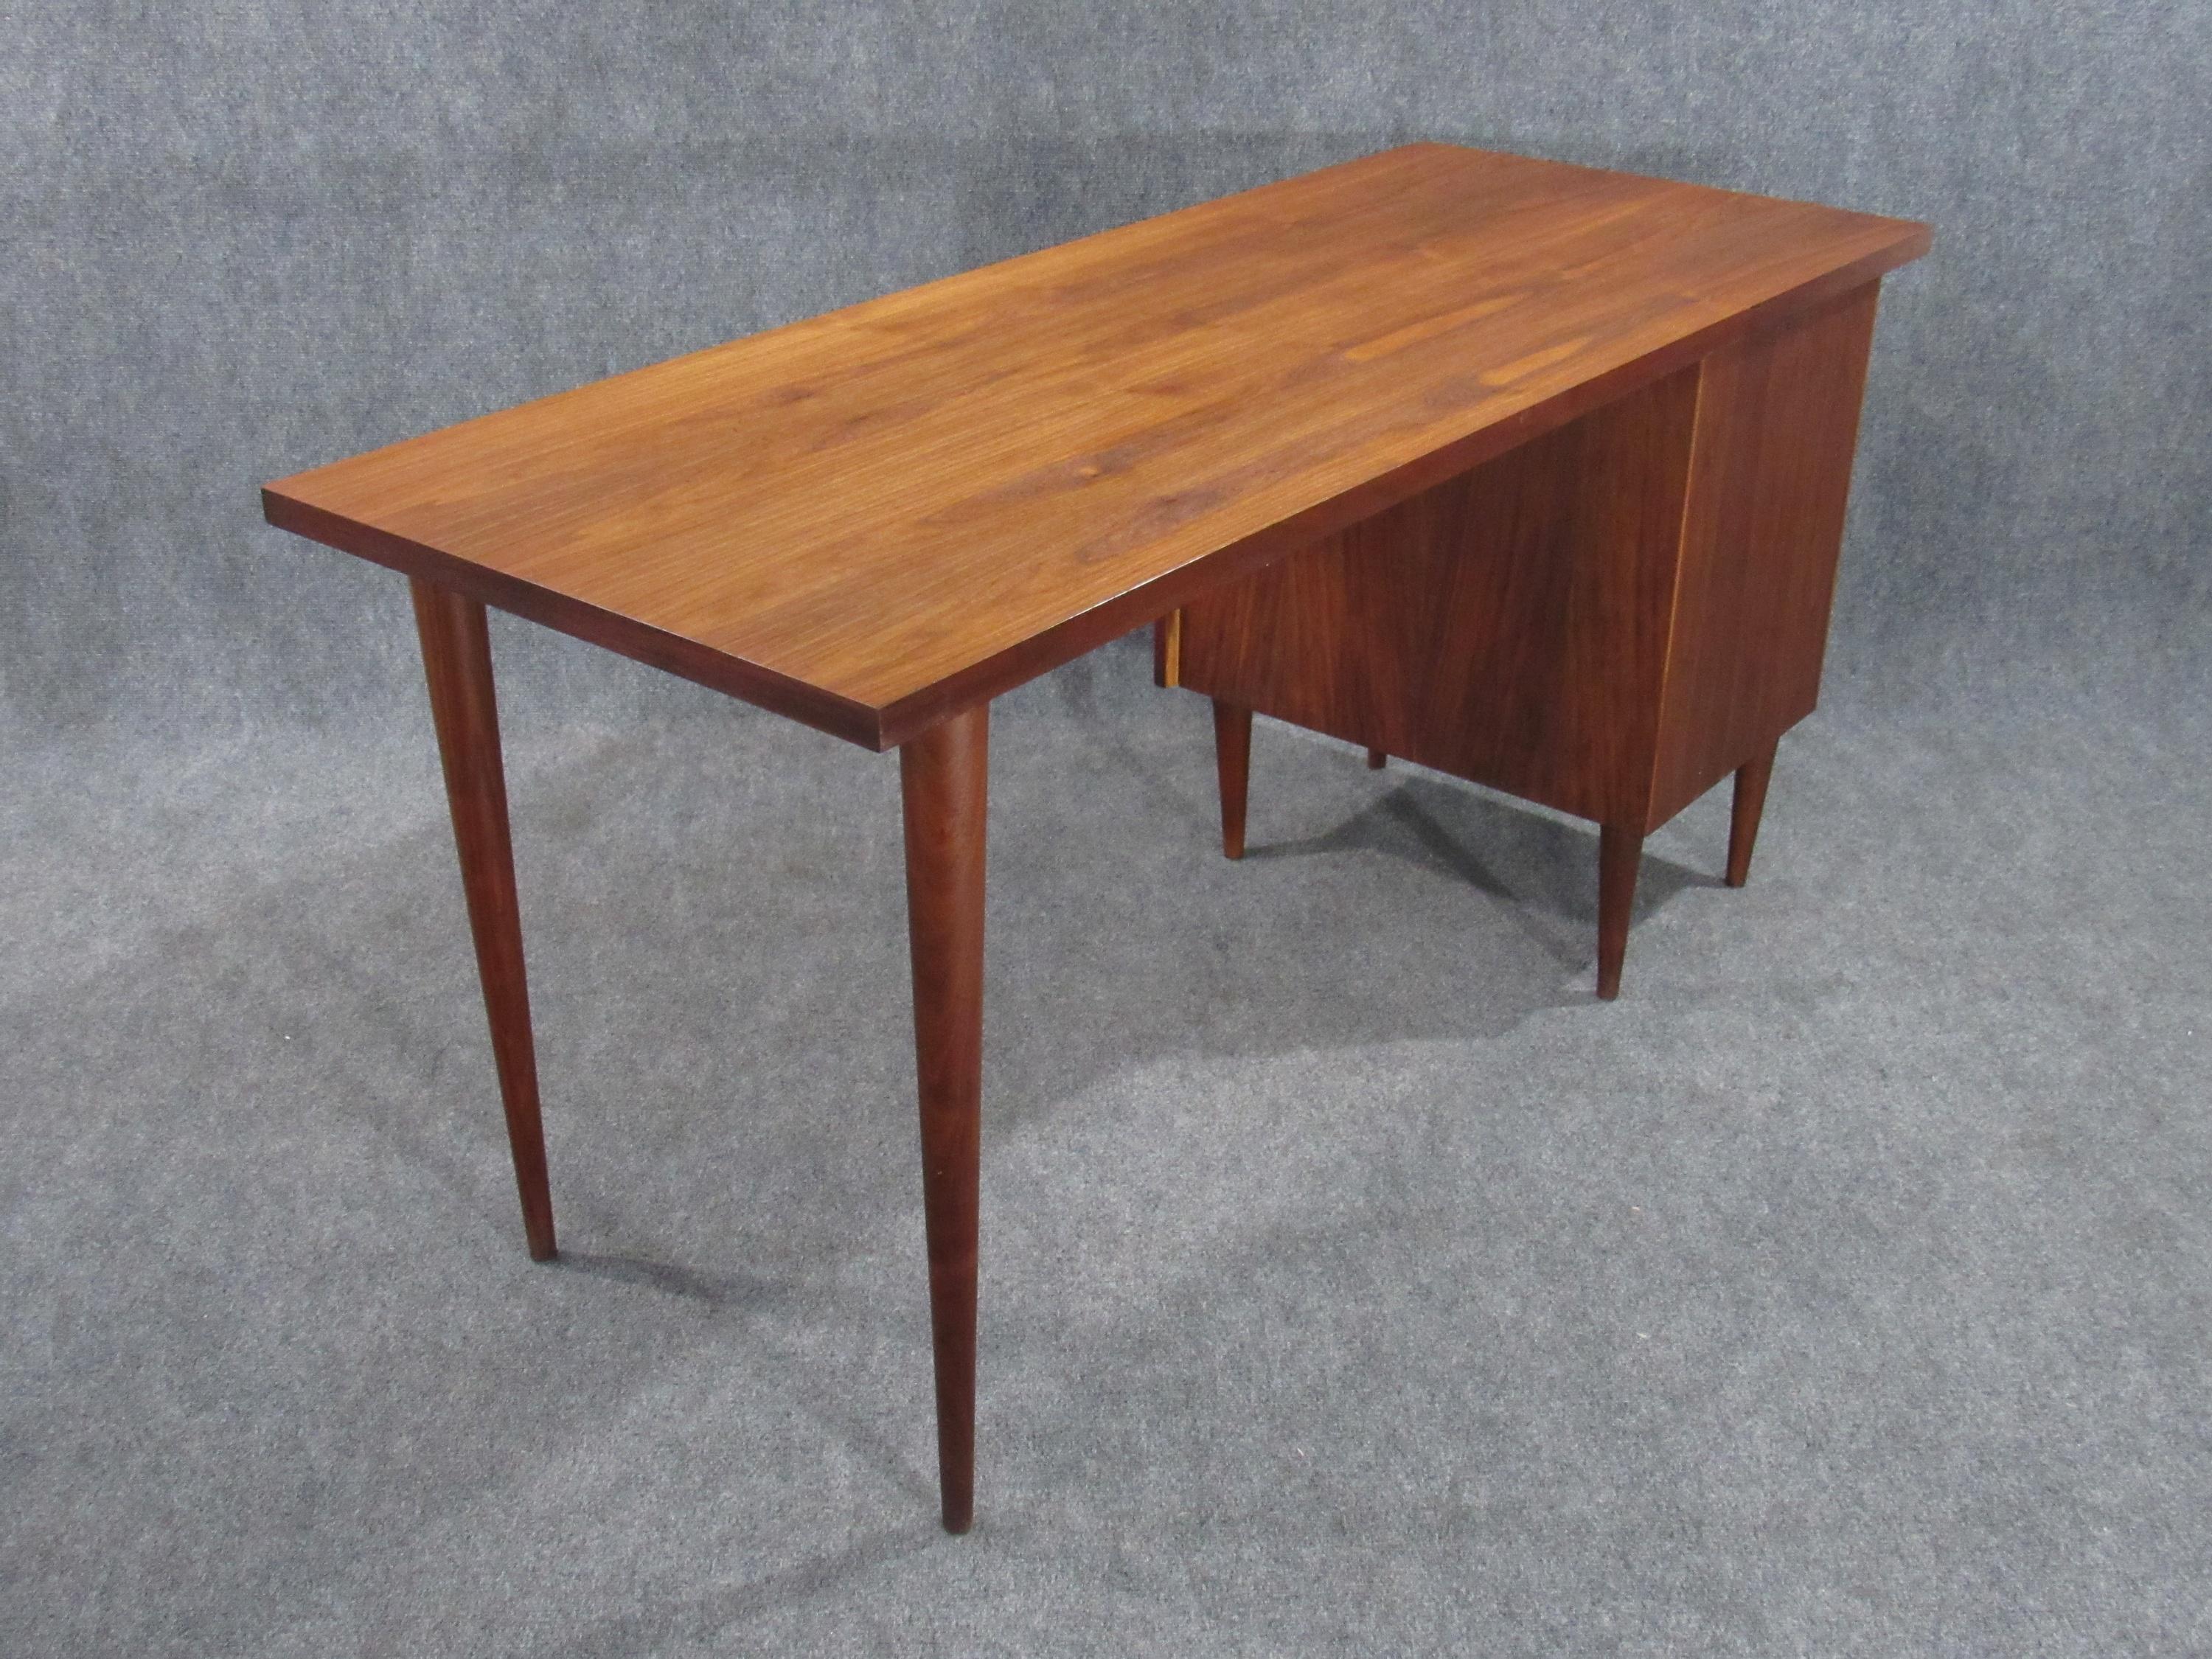 North American Mid-Century Modern Walnut Small Desk by Ben Thompson for Design Research